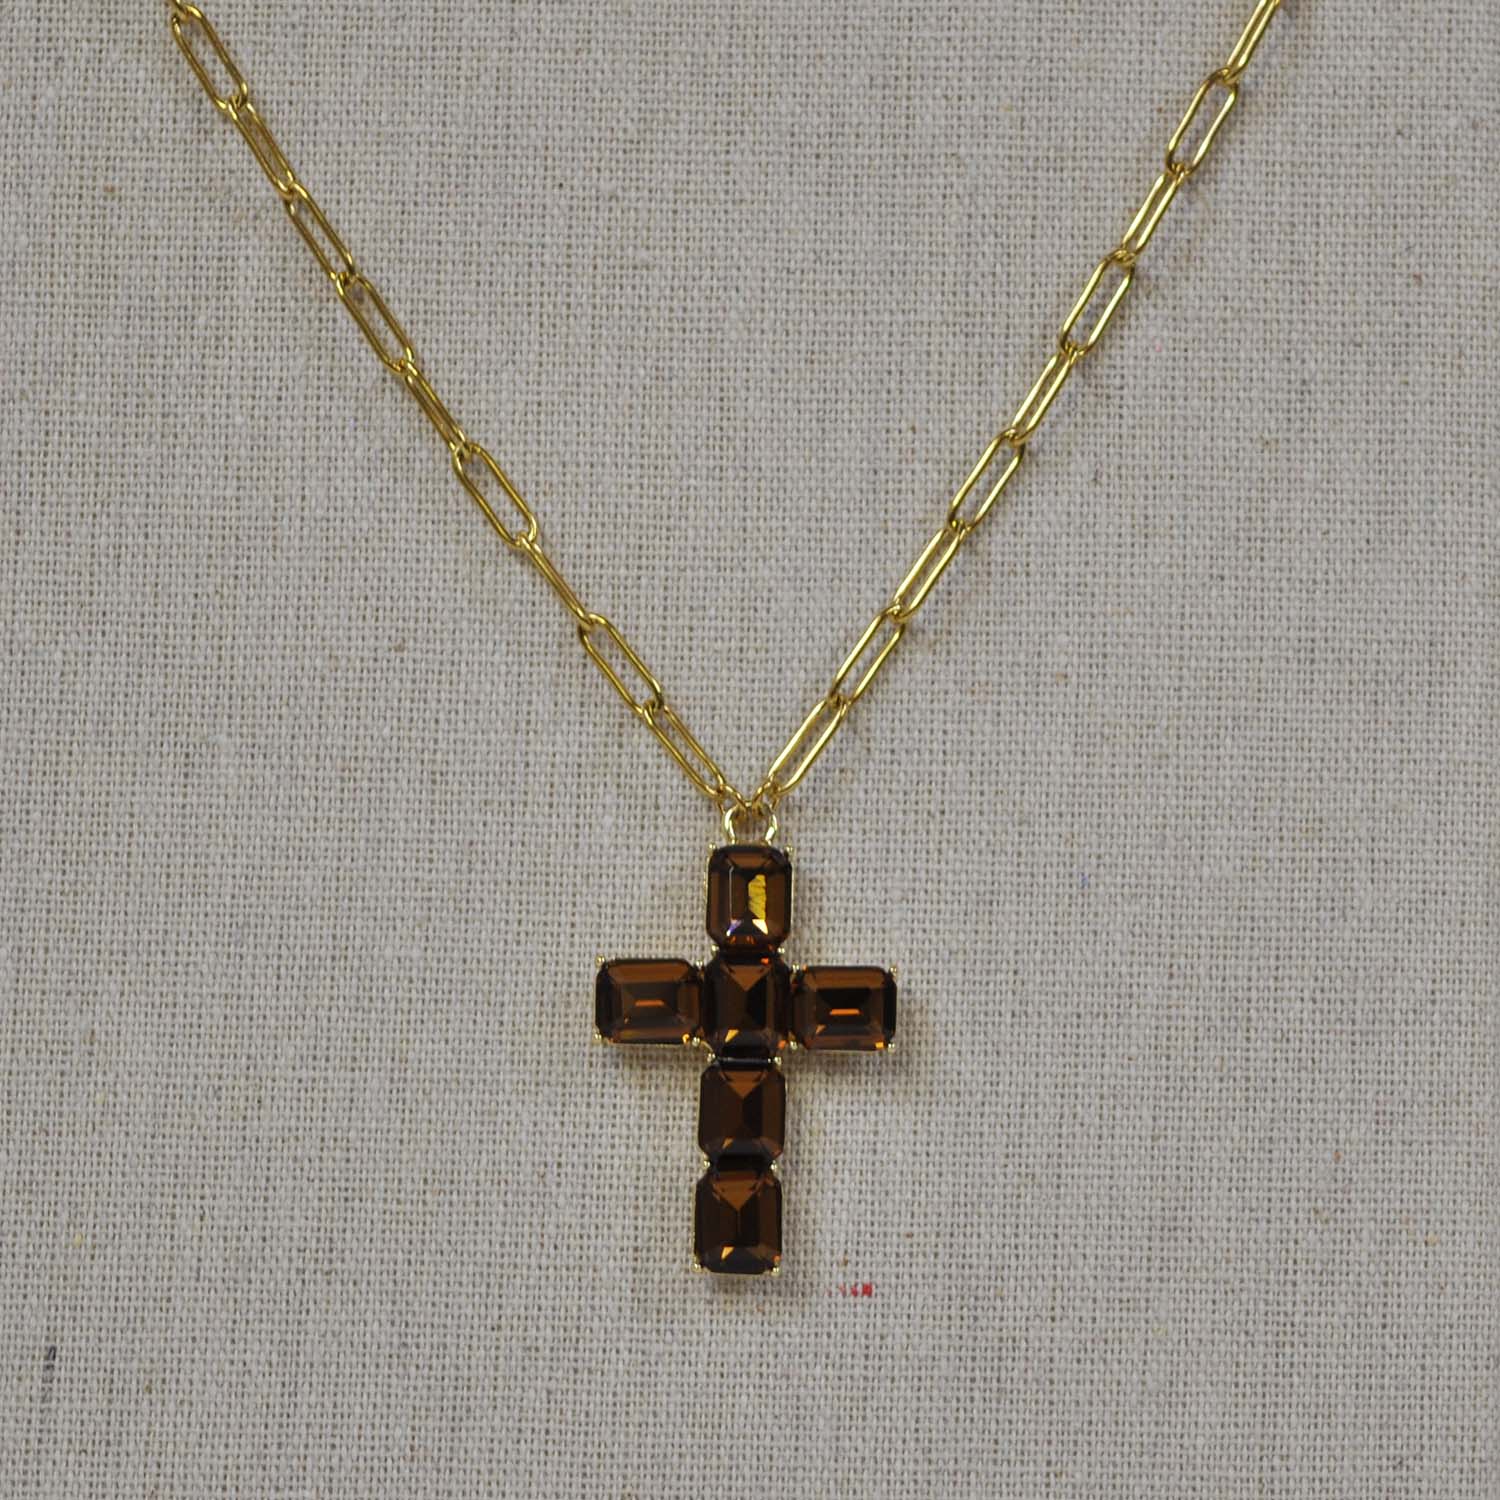 Brown cross necklace